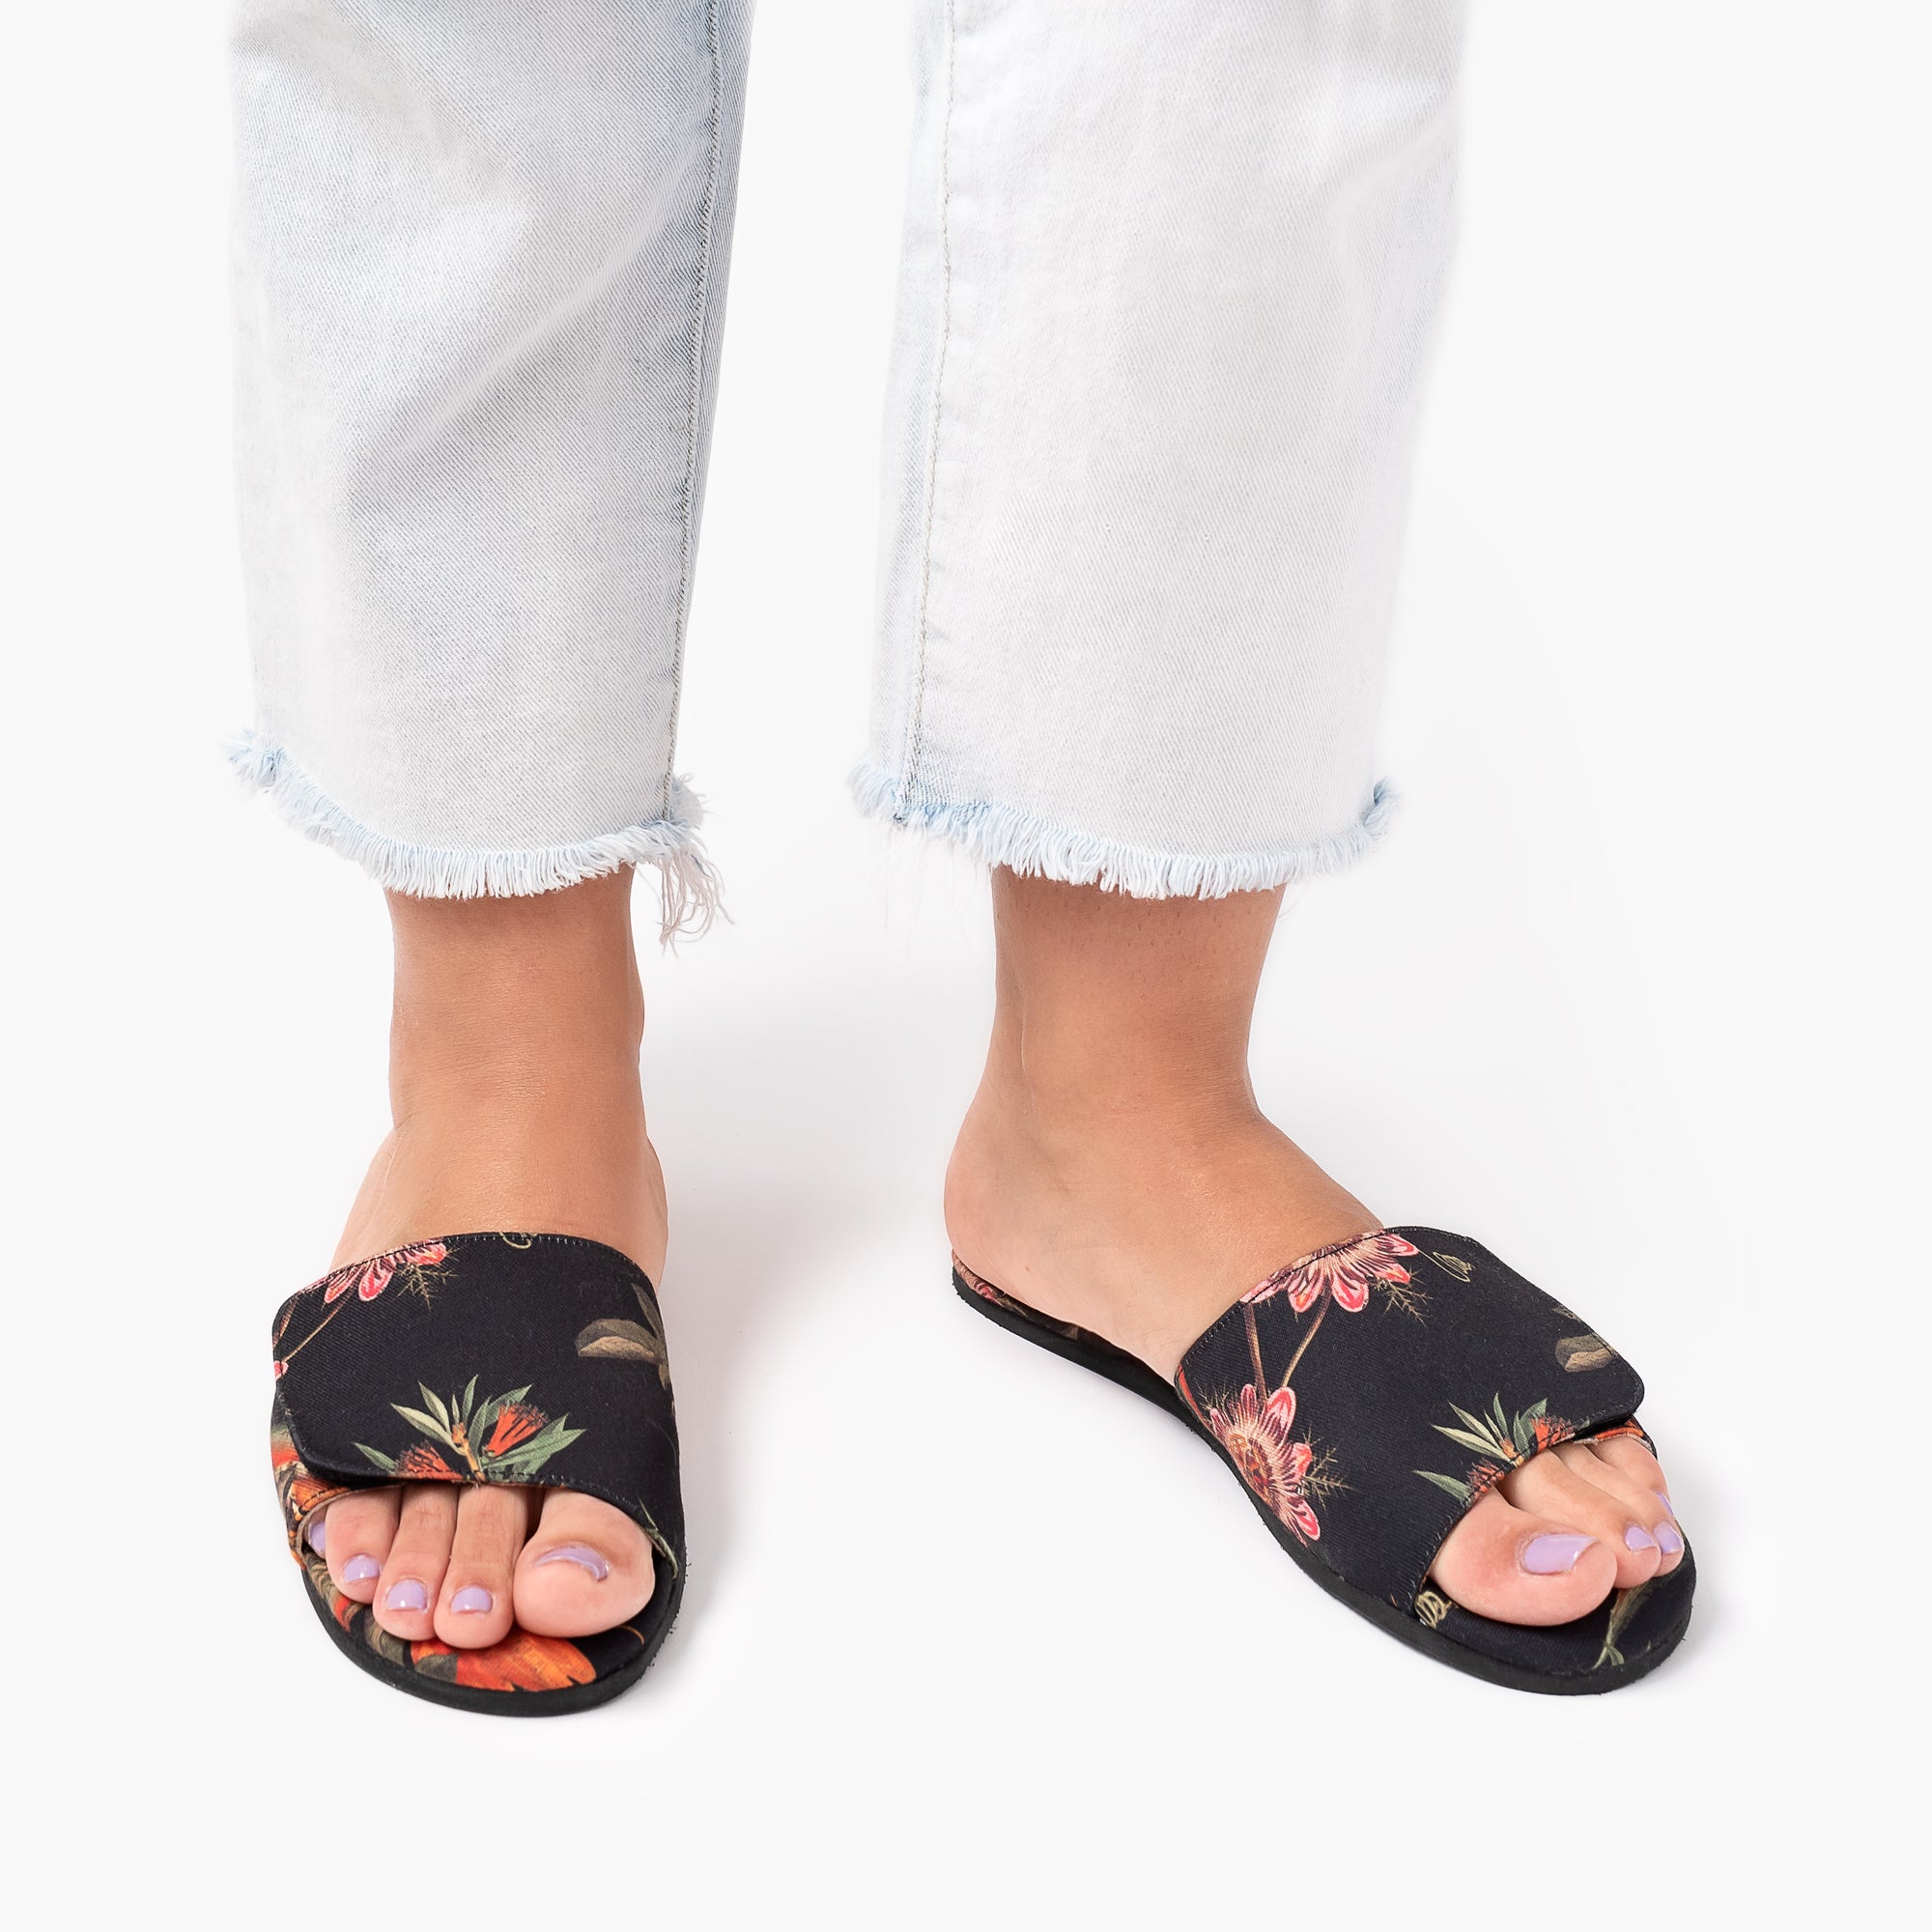 Tropicalis Slipper - Insecta Shoes